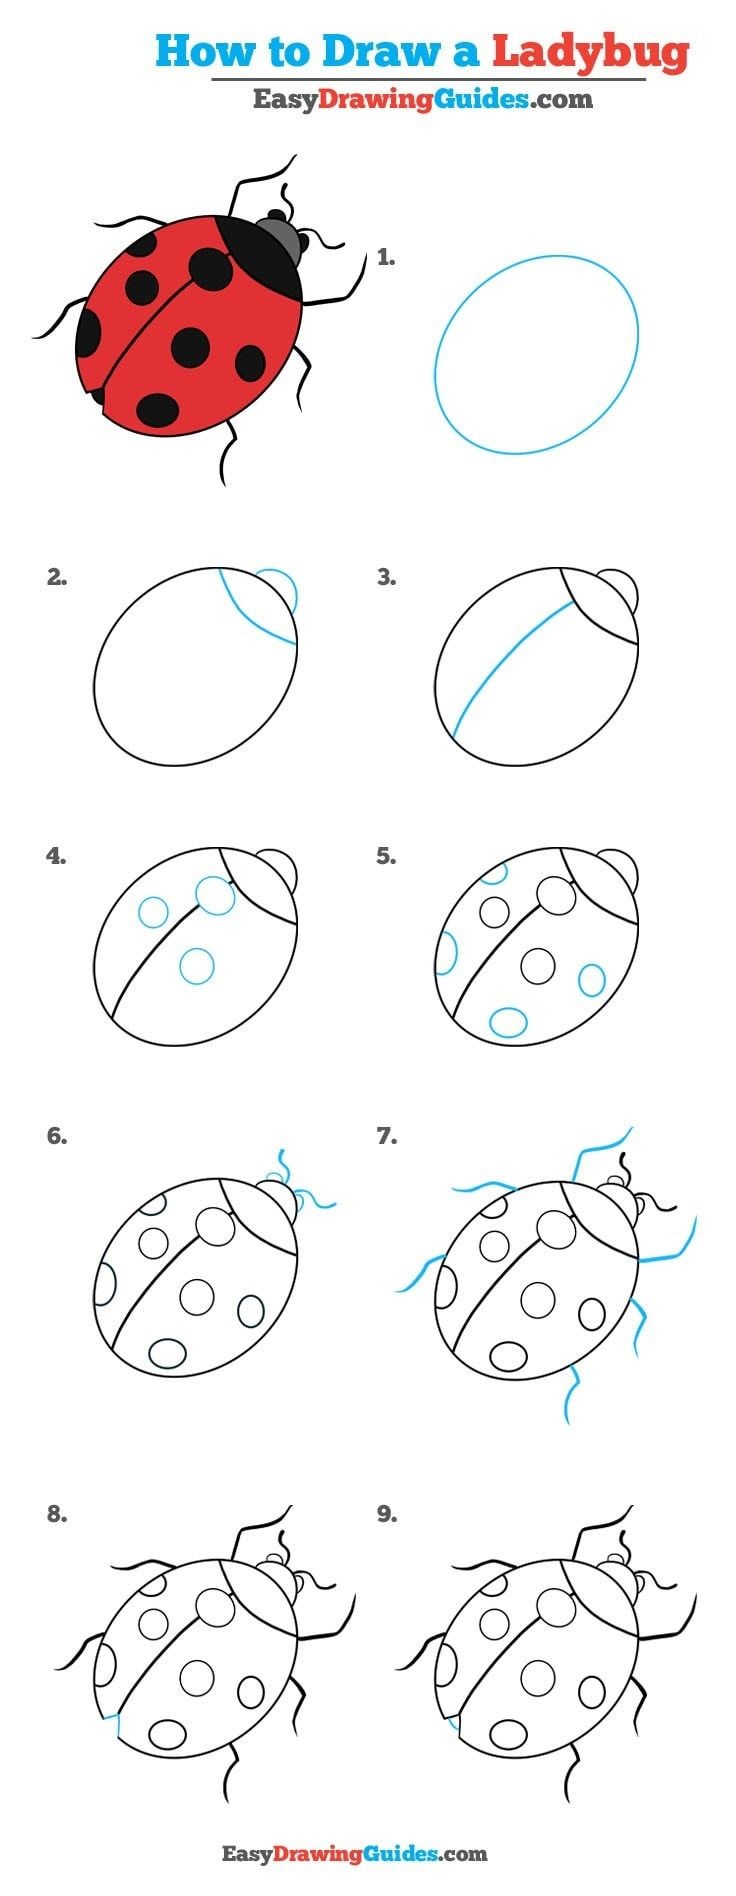 A detailed step-by-step Ladybug Drawing Ideas